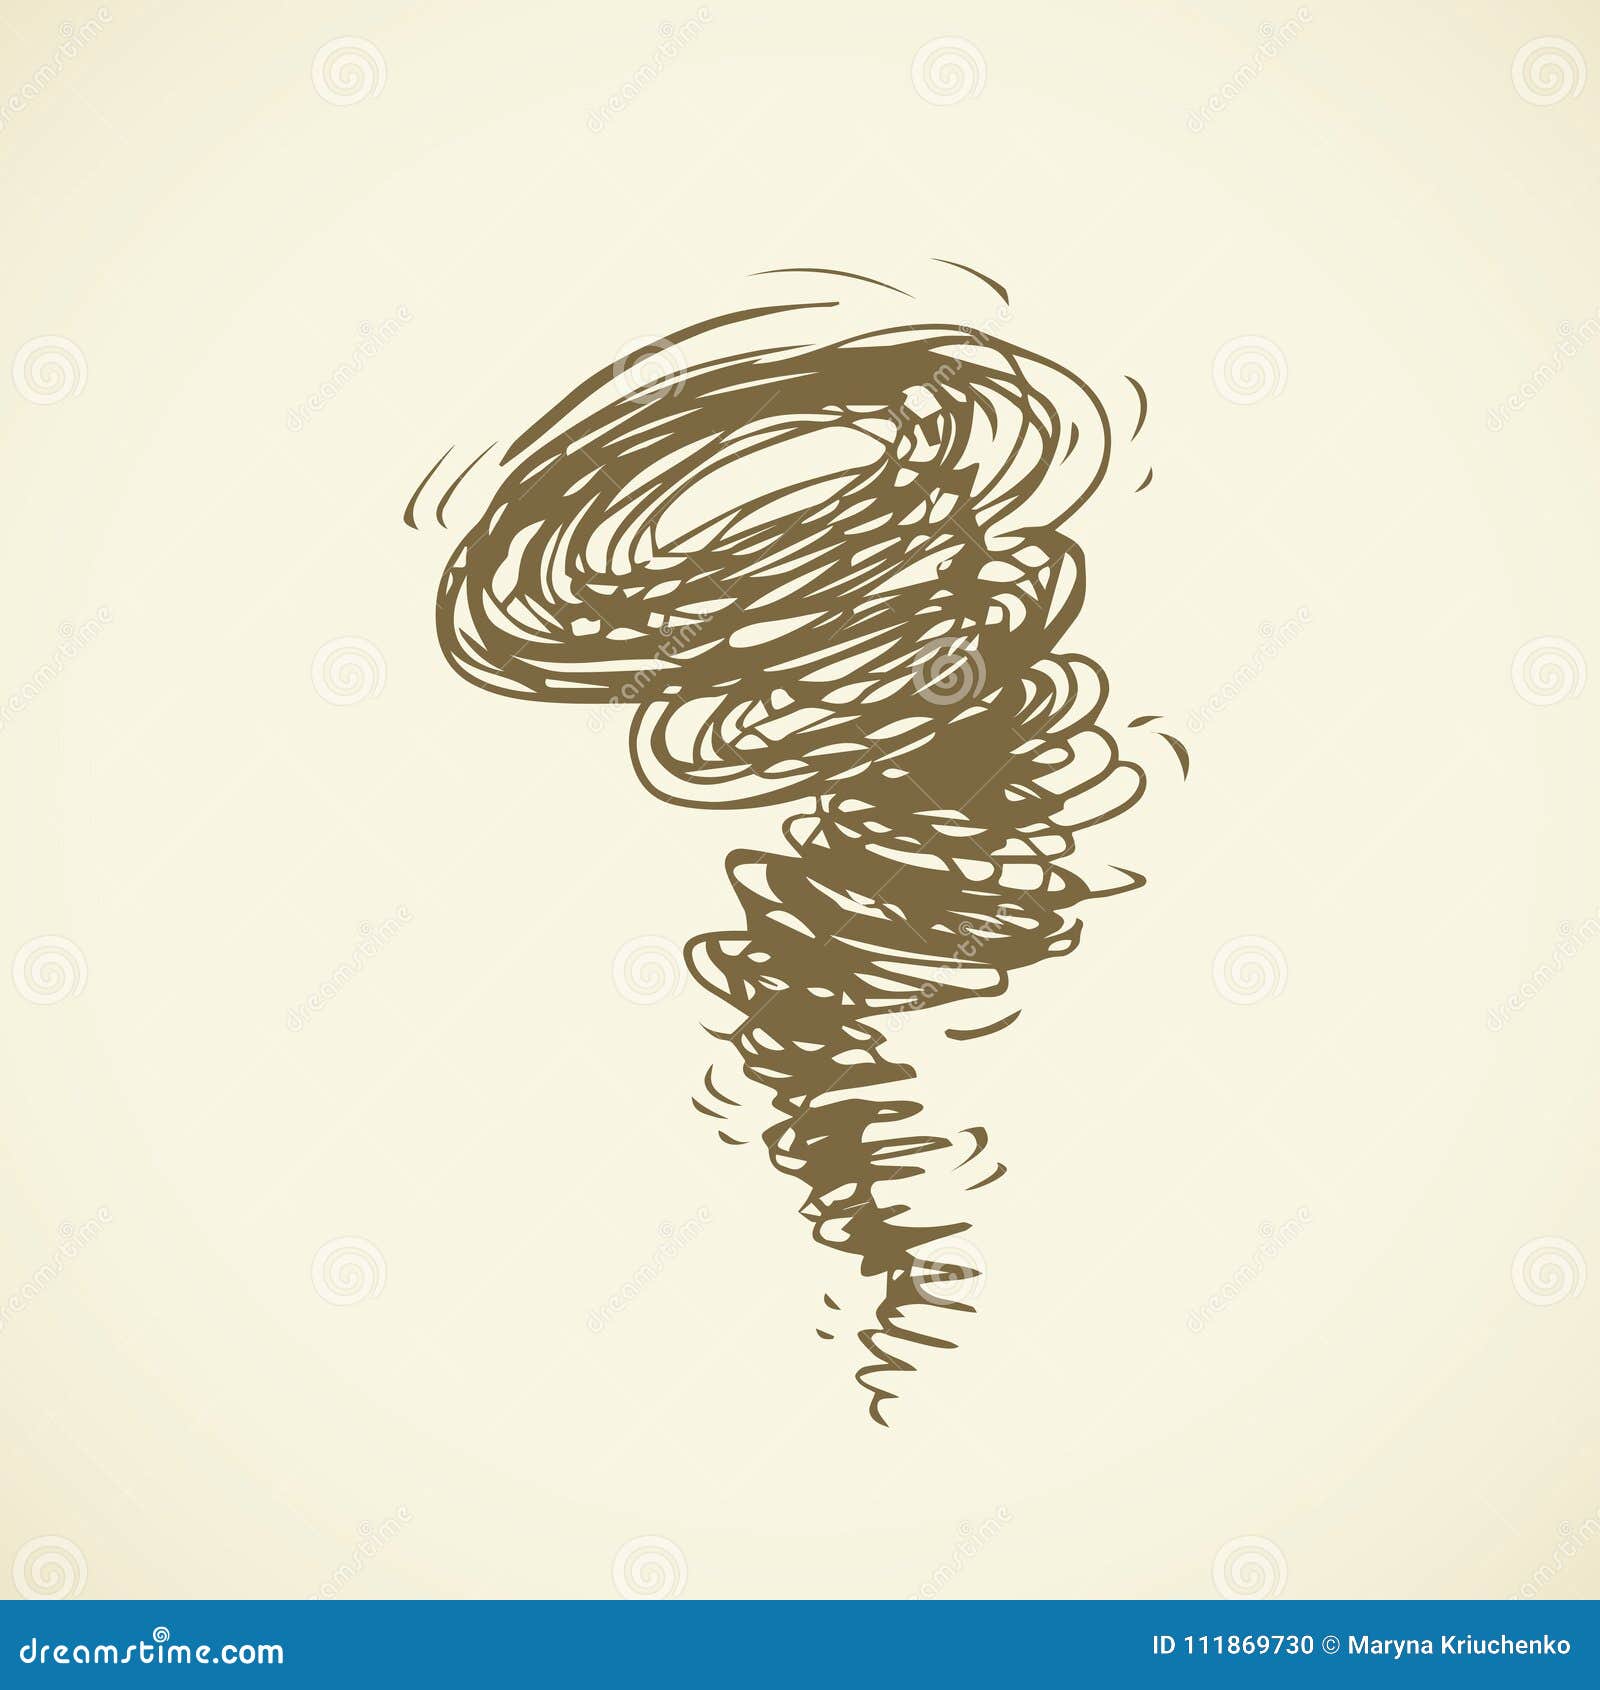 How to Draw a Tornado - Really Easy Drawing Tutorial